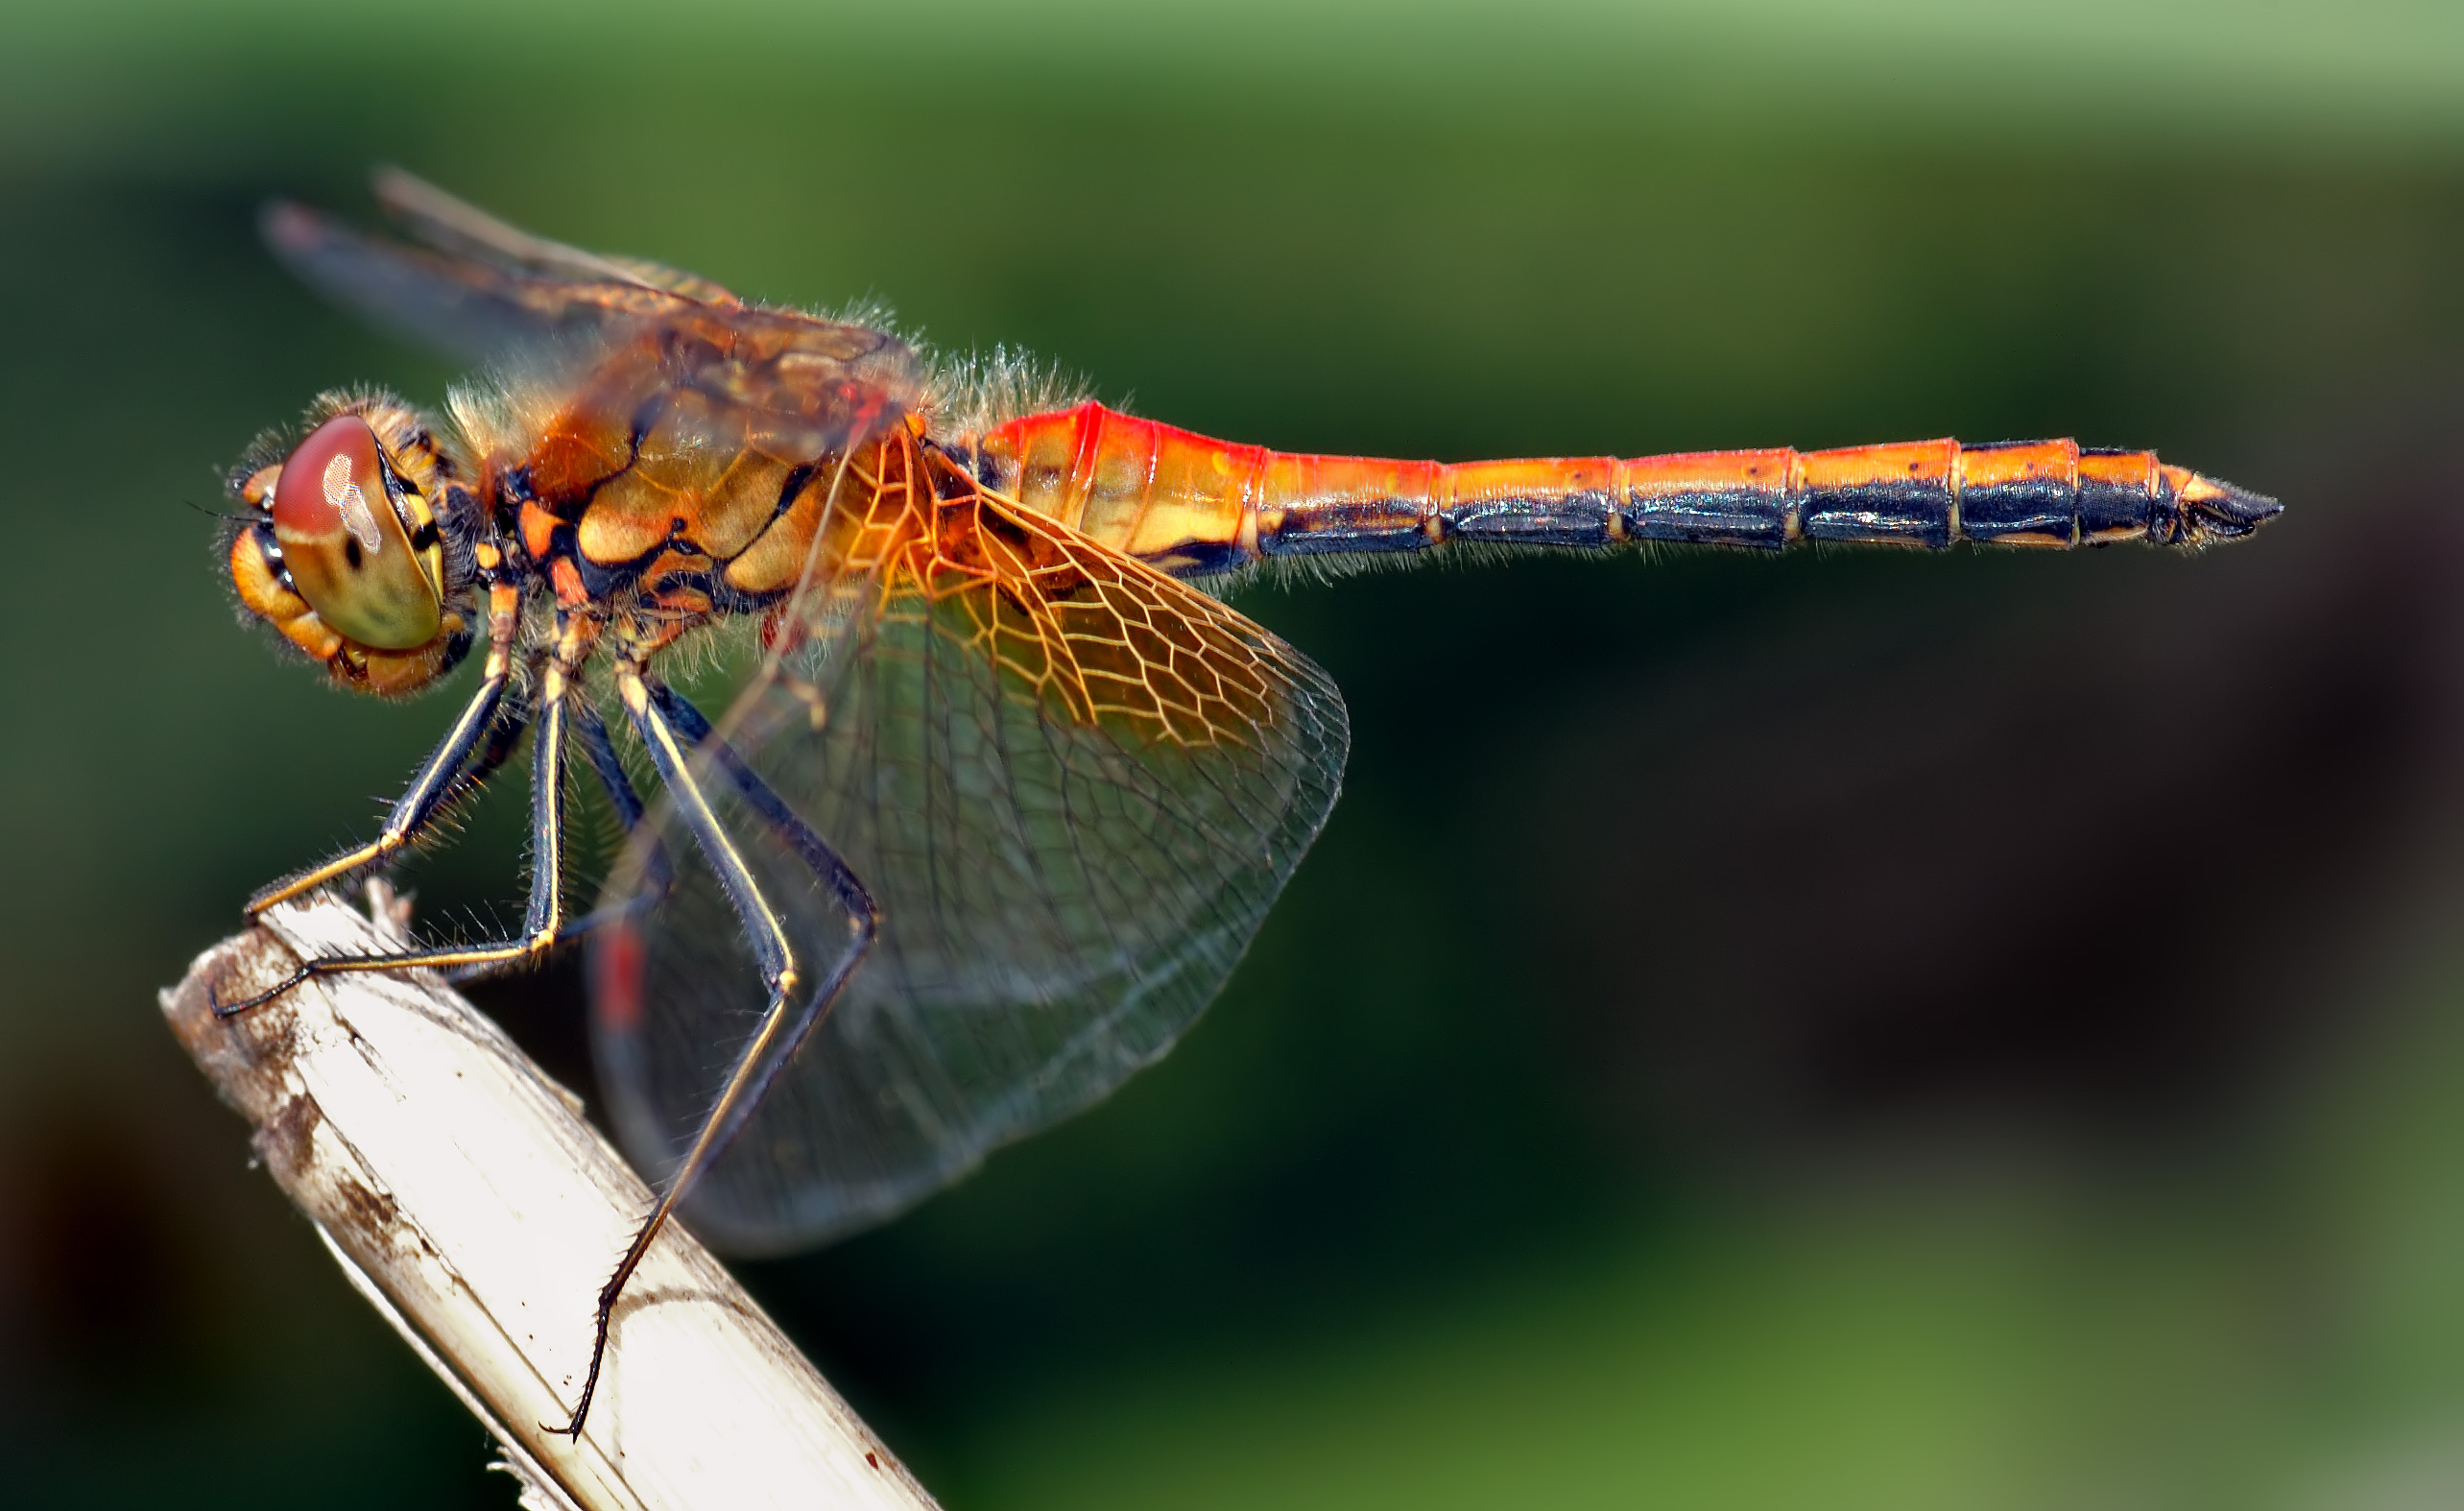 The dragonfly photo